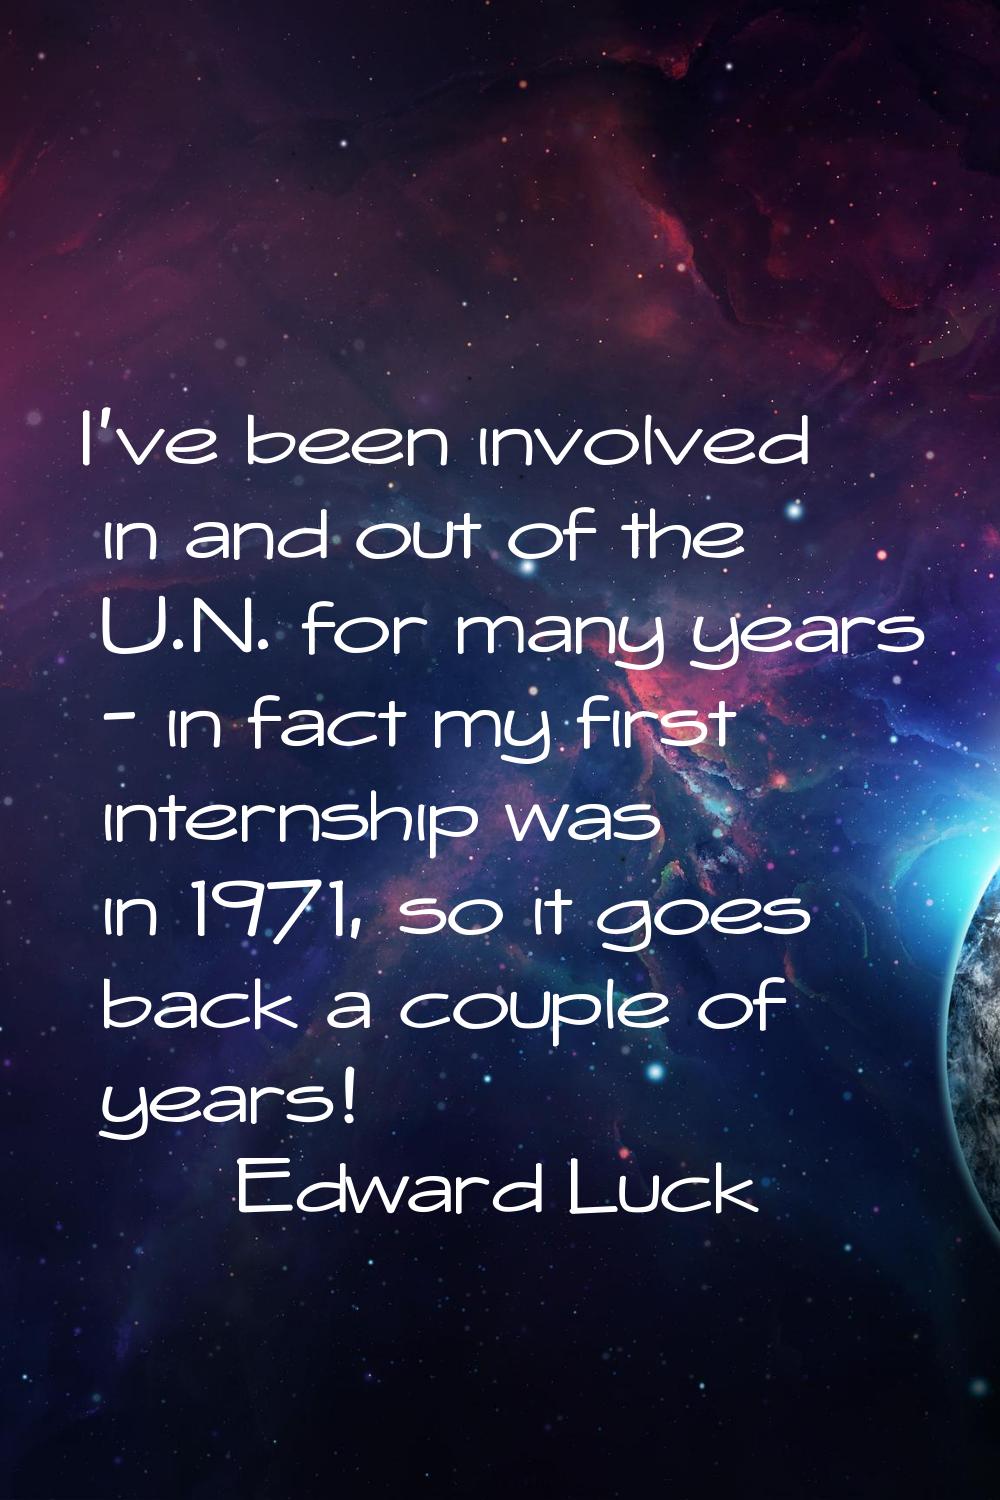 I've been involved in and out of the U.N. for many years - in fact my first internship was in 1971,